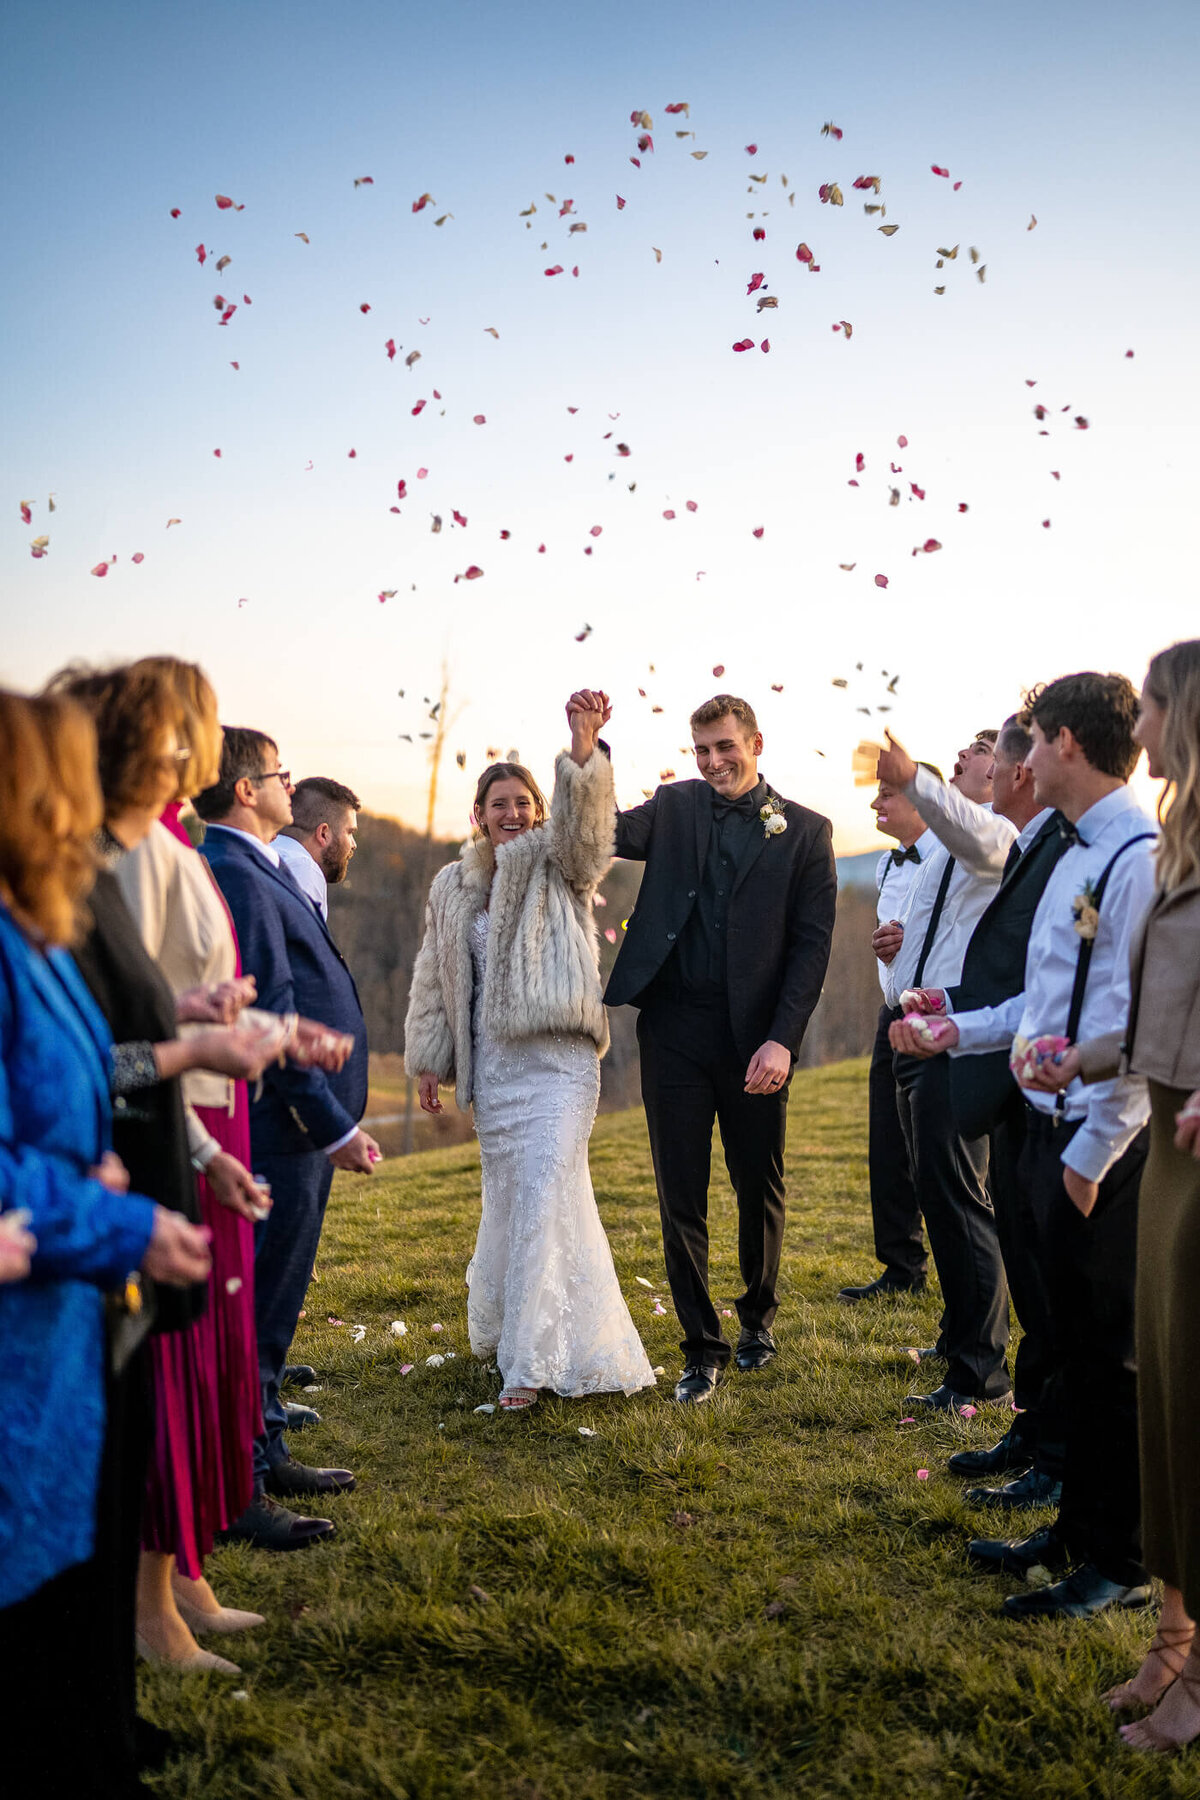 Bride and groom smile and hold hands during their flower petal exit and their intimate wedding at Marked Tree Vineyard in Ashville, NC. Wedding photography captured by Michael Fricke Photography